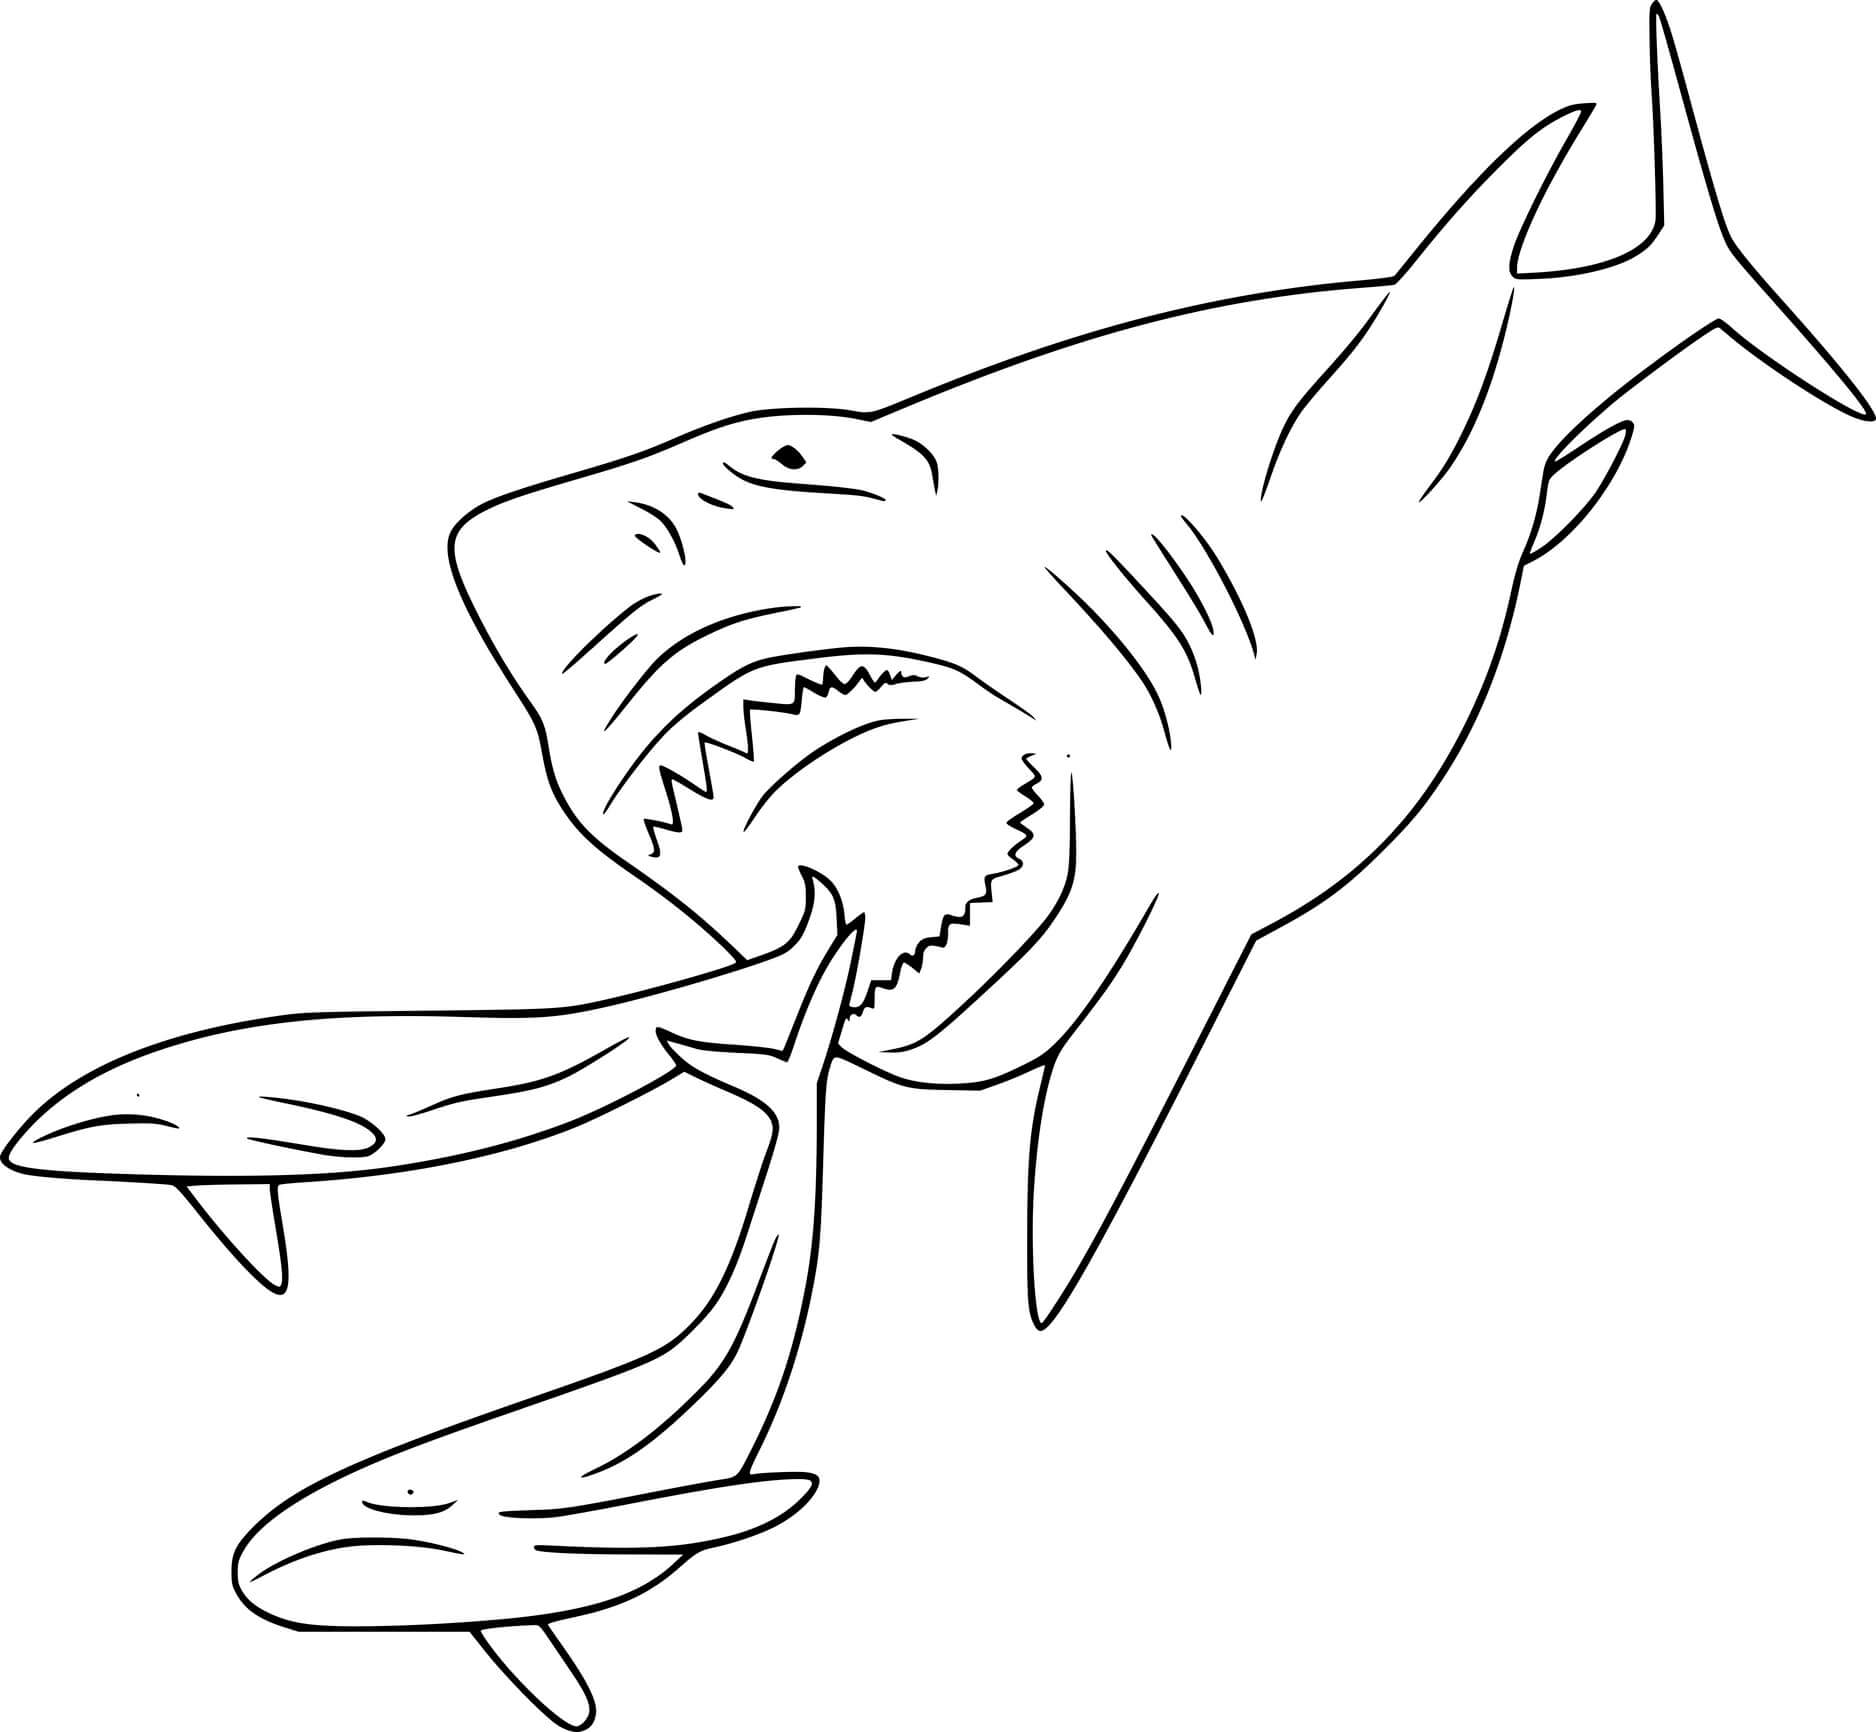 Megalodon Hunting Whales Shark Coloring Page